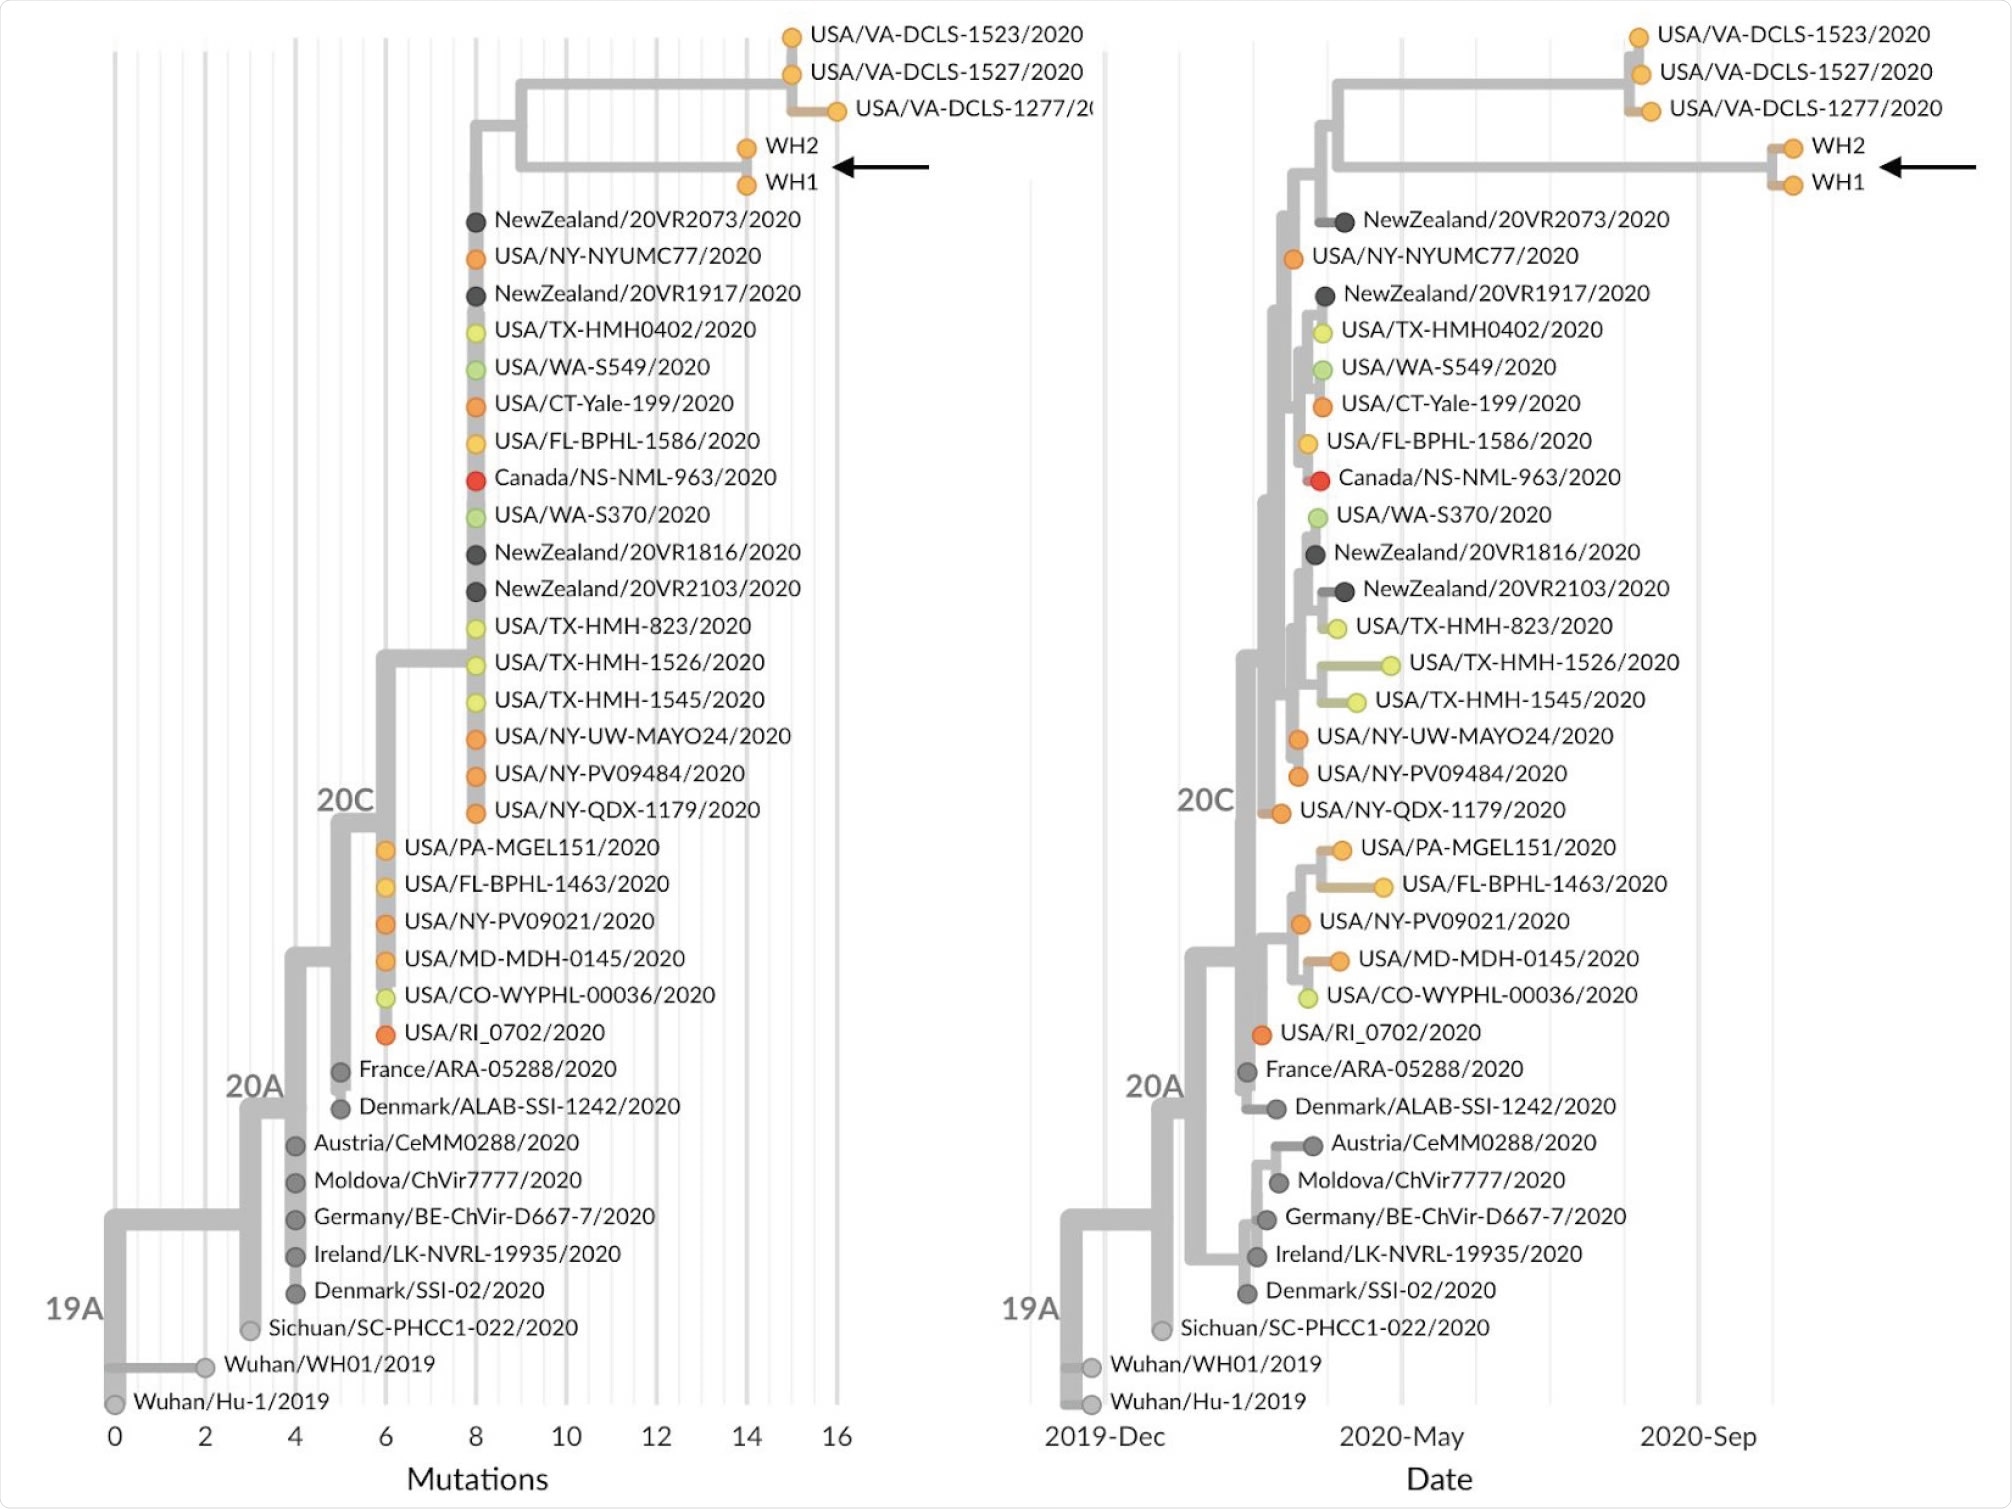 Phylogeny of 38 SARS-CoV-2 viruses that are either sister lineages to WH1 and WH2 or directly ancestral in the global maximum-likelihood phylogeny. Shown are both (A) phylogeny with branch lengths scaled by number of mutations from Wuhan reference genome and (B) temporally resolved phylogeny with branch lengths estimated according to a molecular clock analysis. Both panels are colored according to state of sampling for US samples or colored gray if samples were from outside the US. An interactive version of this figure is available at nextstrain.org/community/blab/ncov-wh/lineage